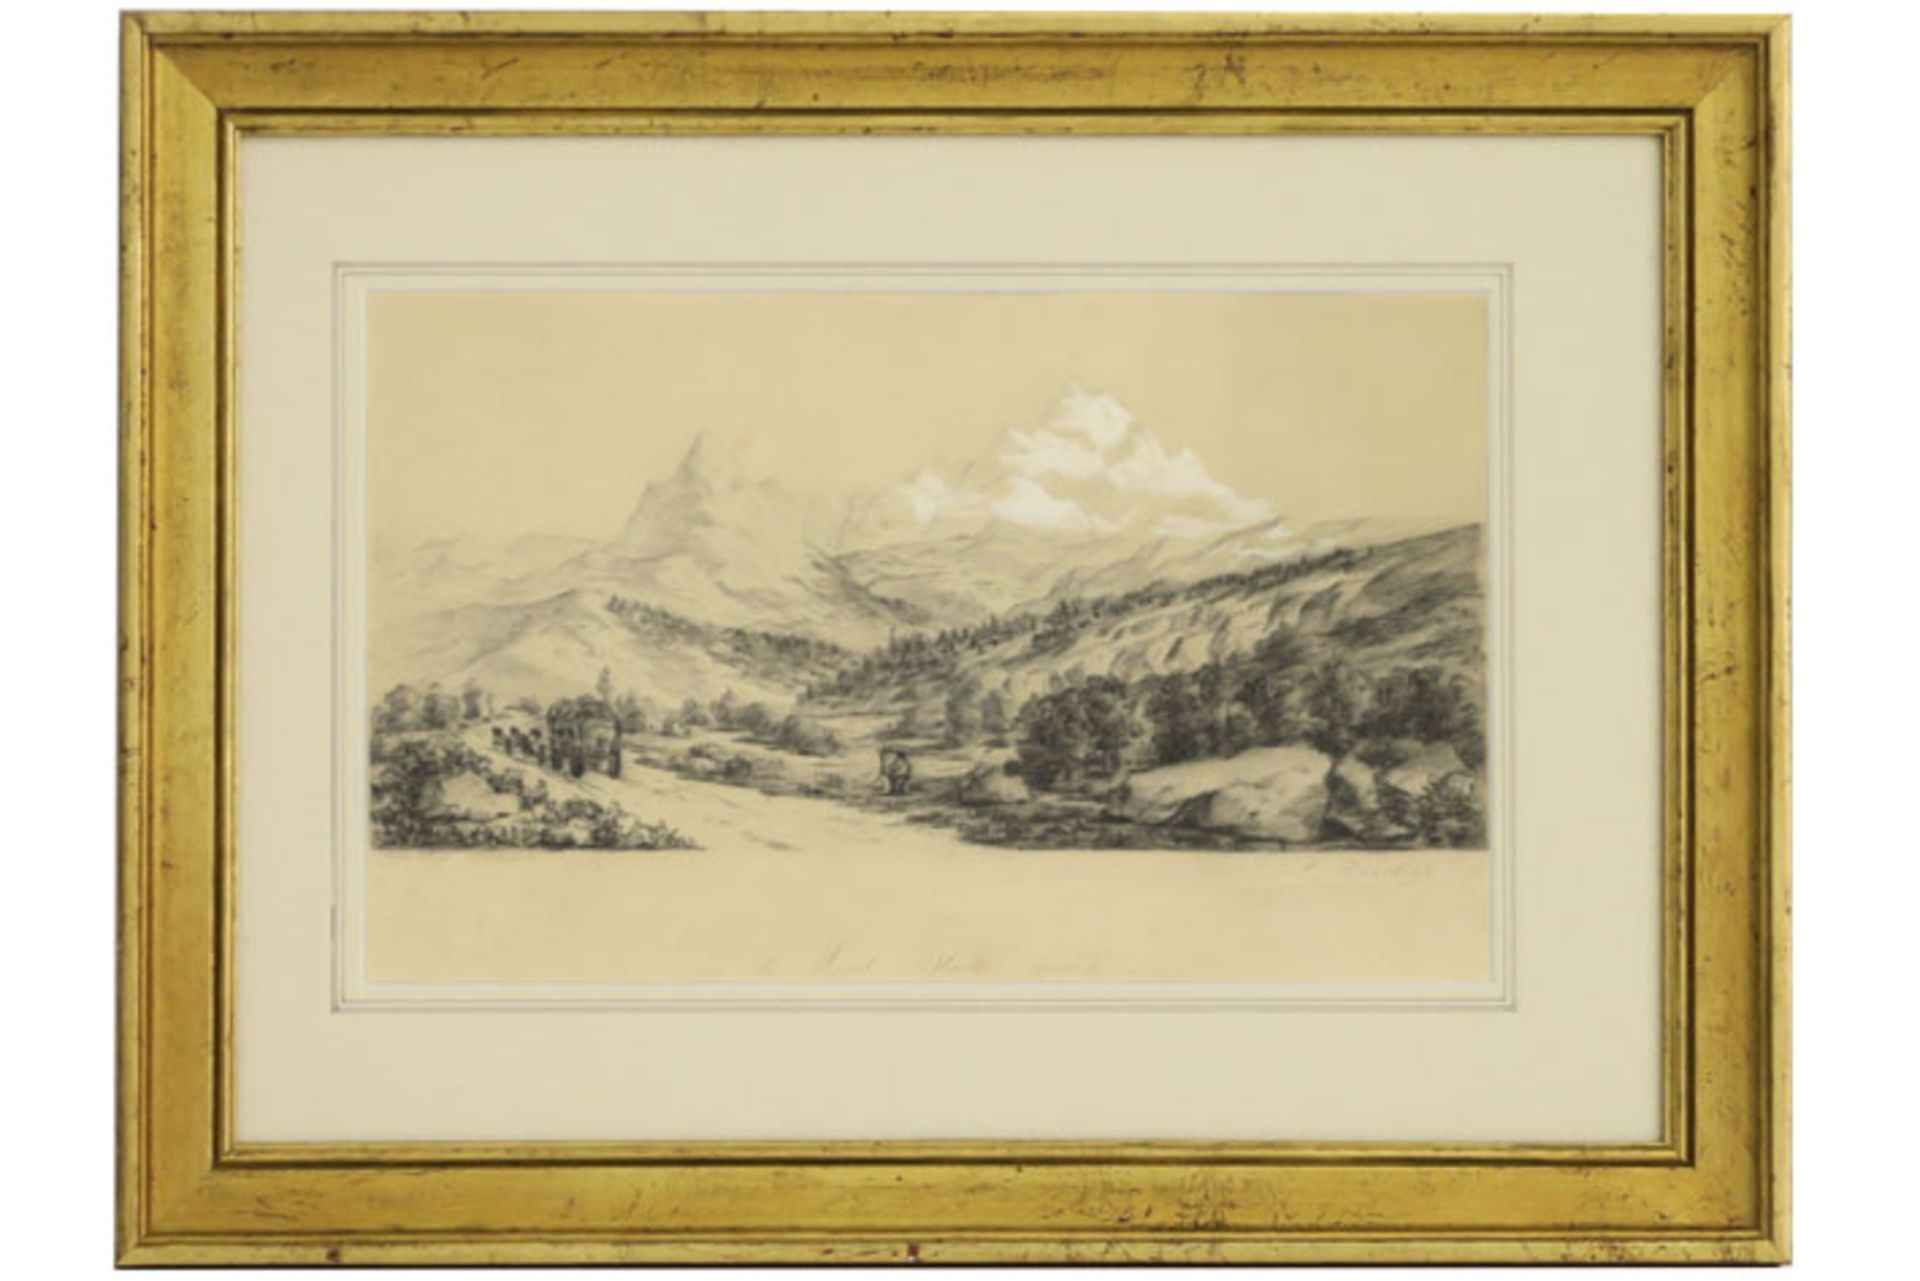 19th Cent. Belgian drawing - signed François Backvis and dated 1887 - - BACKVIS [...]